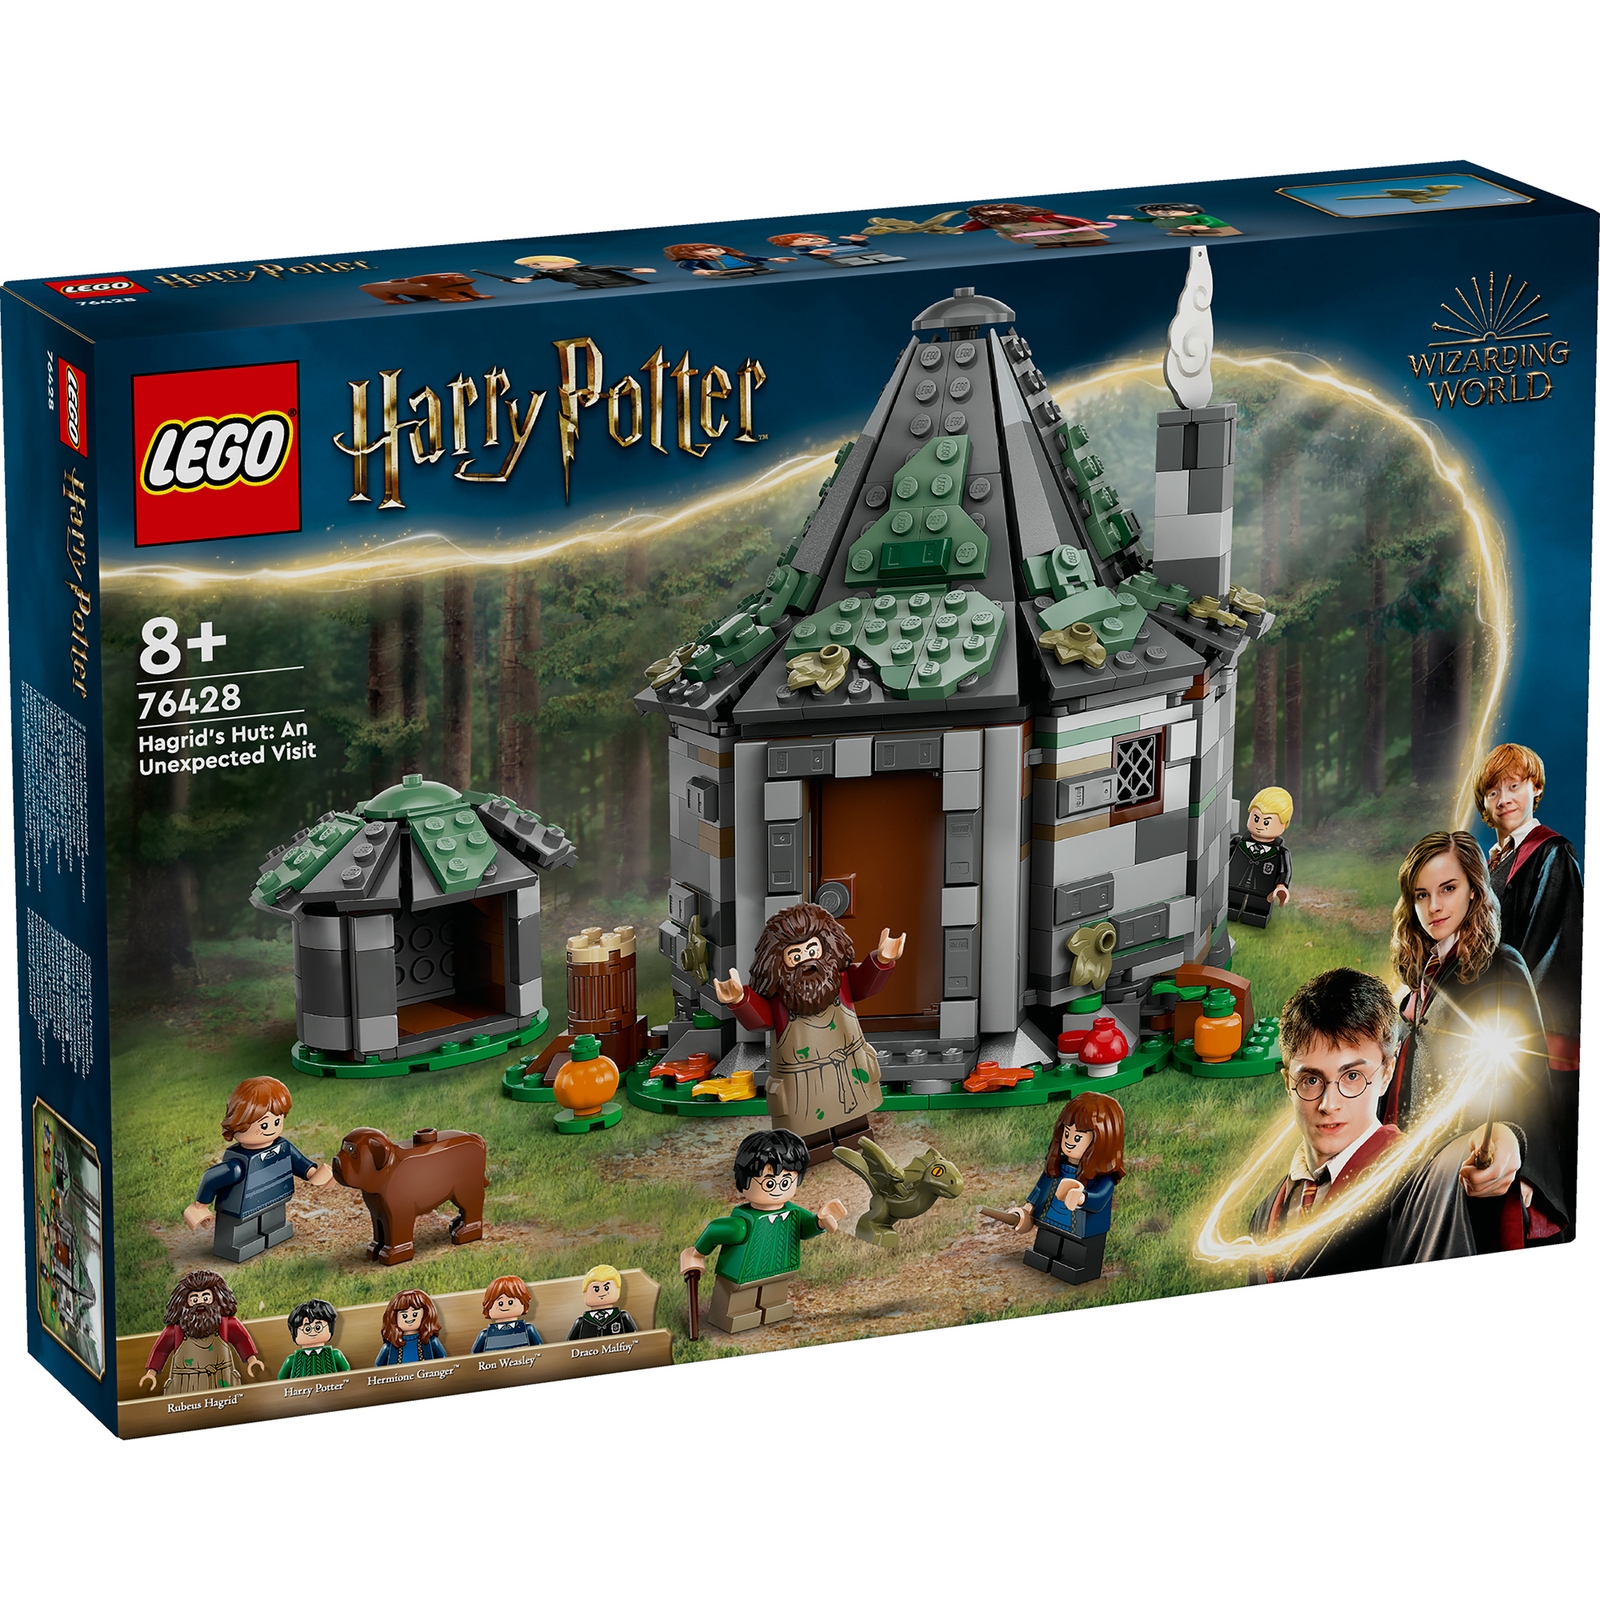 LEGO Harry Potter Hagrid’s Hut: An Unexpected Visit Fantasy Toy 76428